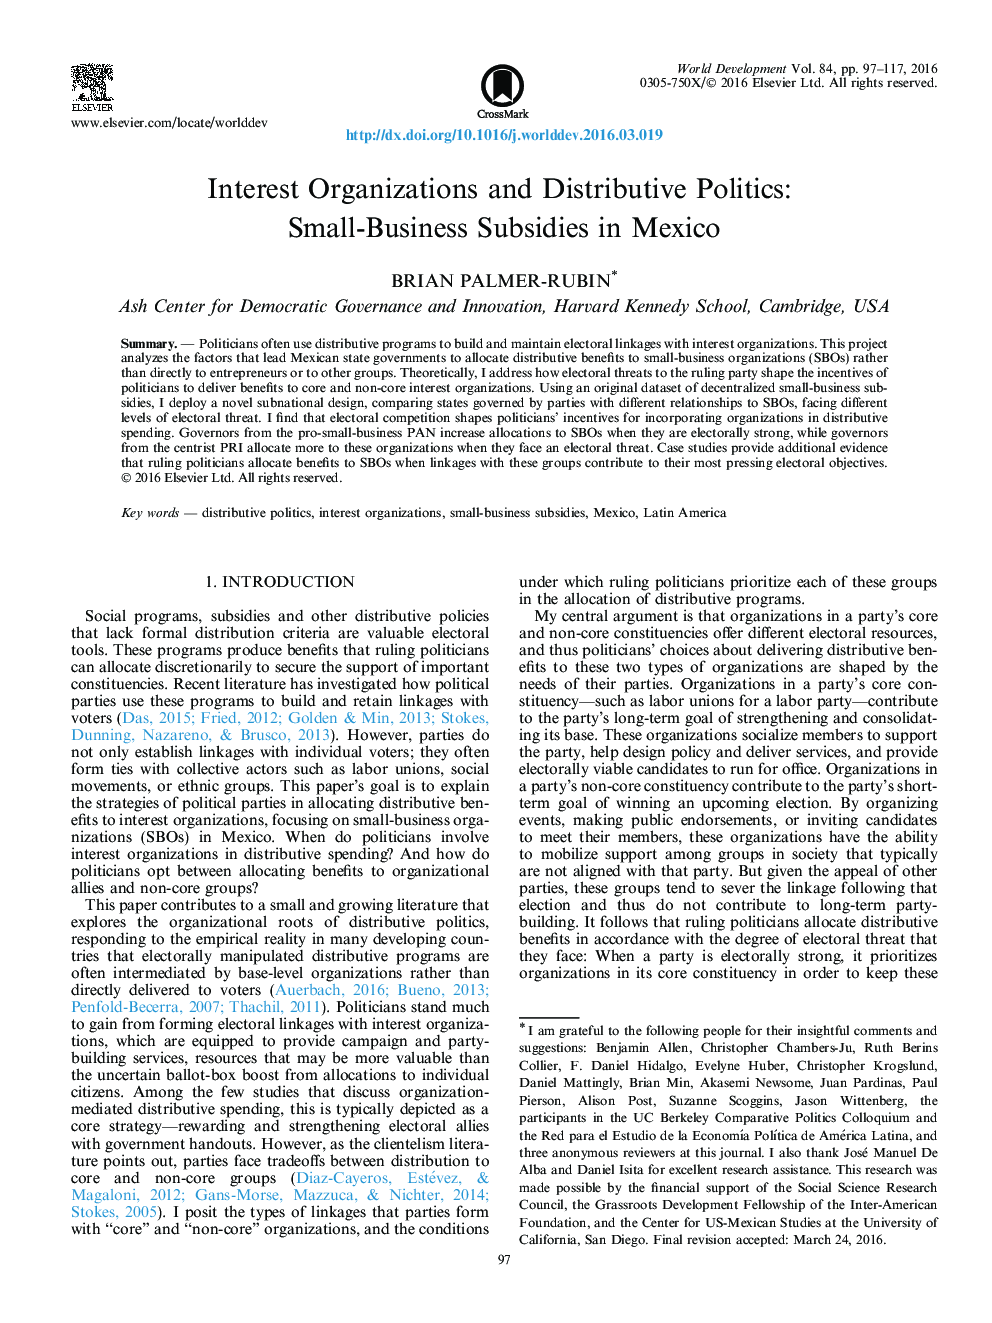 Interest Organizations and Distributive Politics: Small-Business Subsidies in Mexico